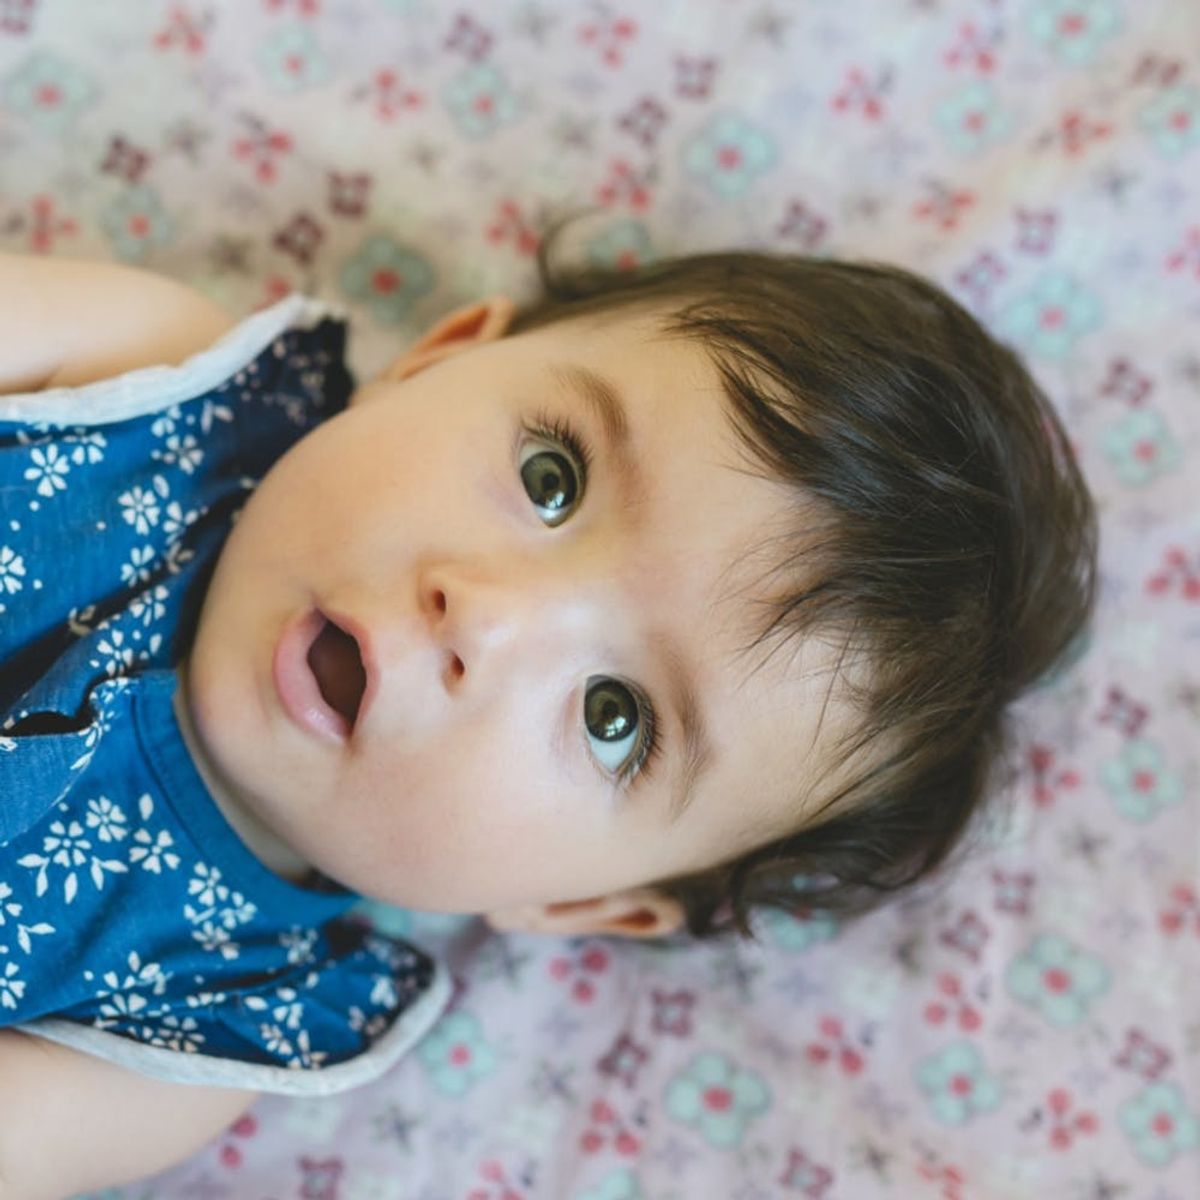 The Ideal Baby Name Based on Your Myers-Briggs Personality Type